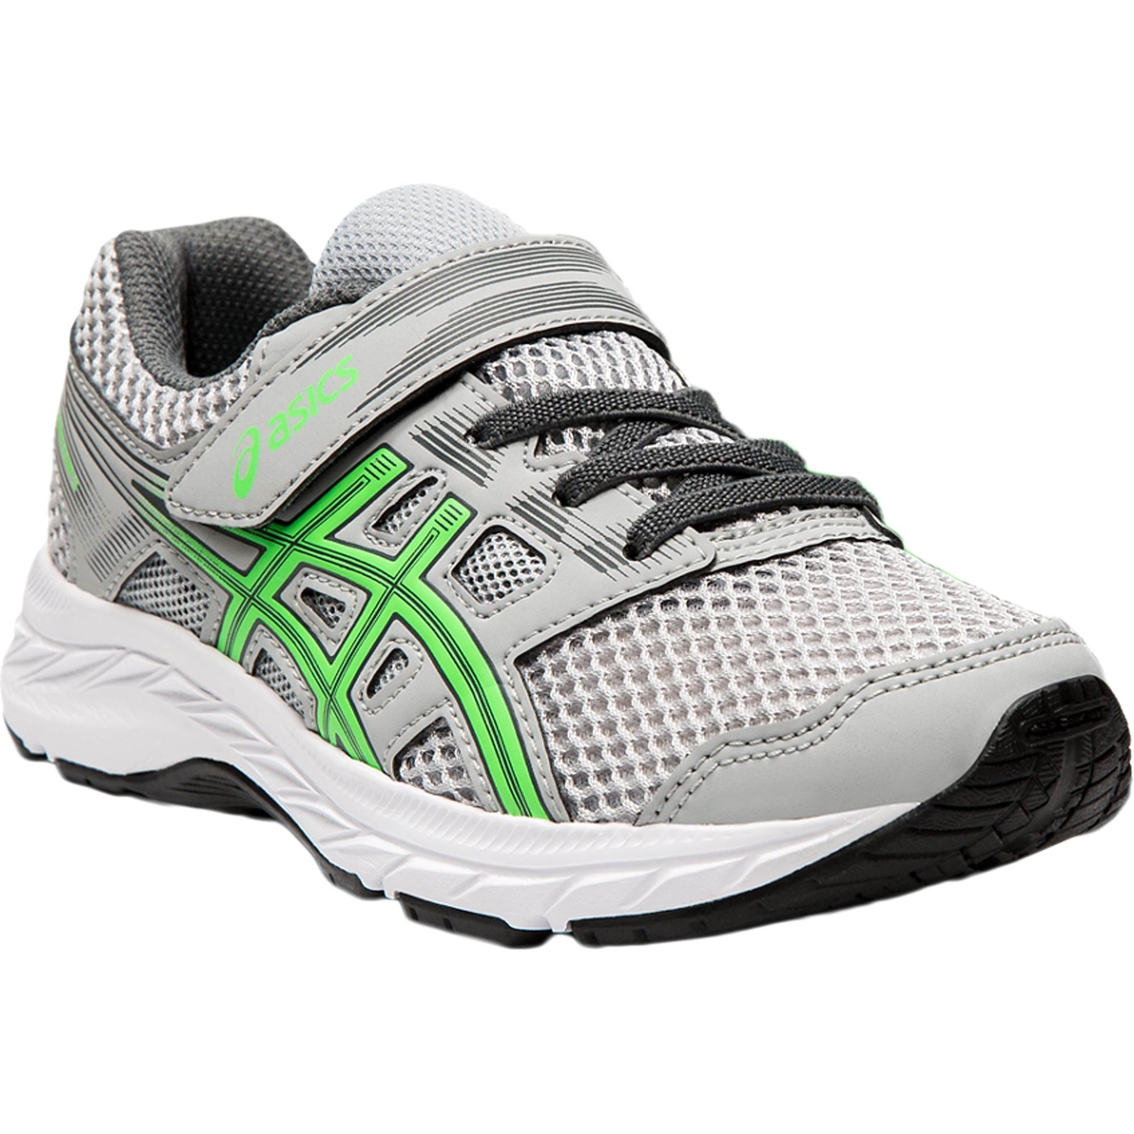 youth asics running shoes cheap online